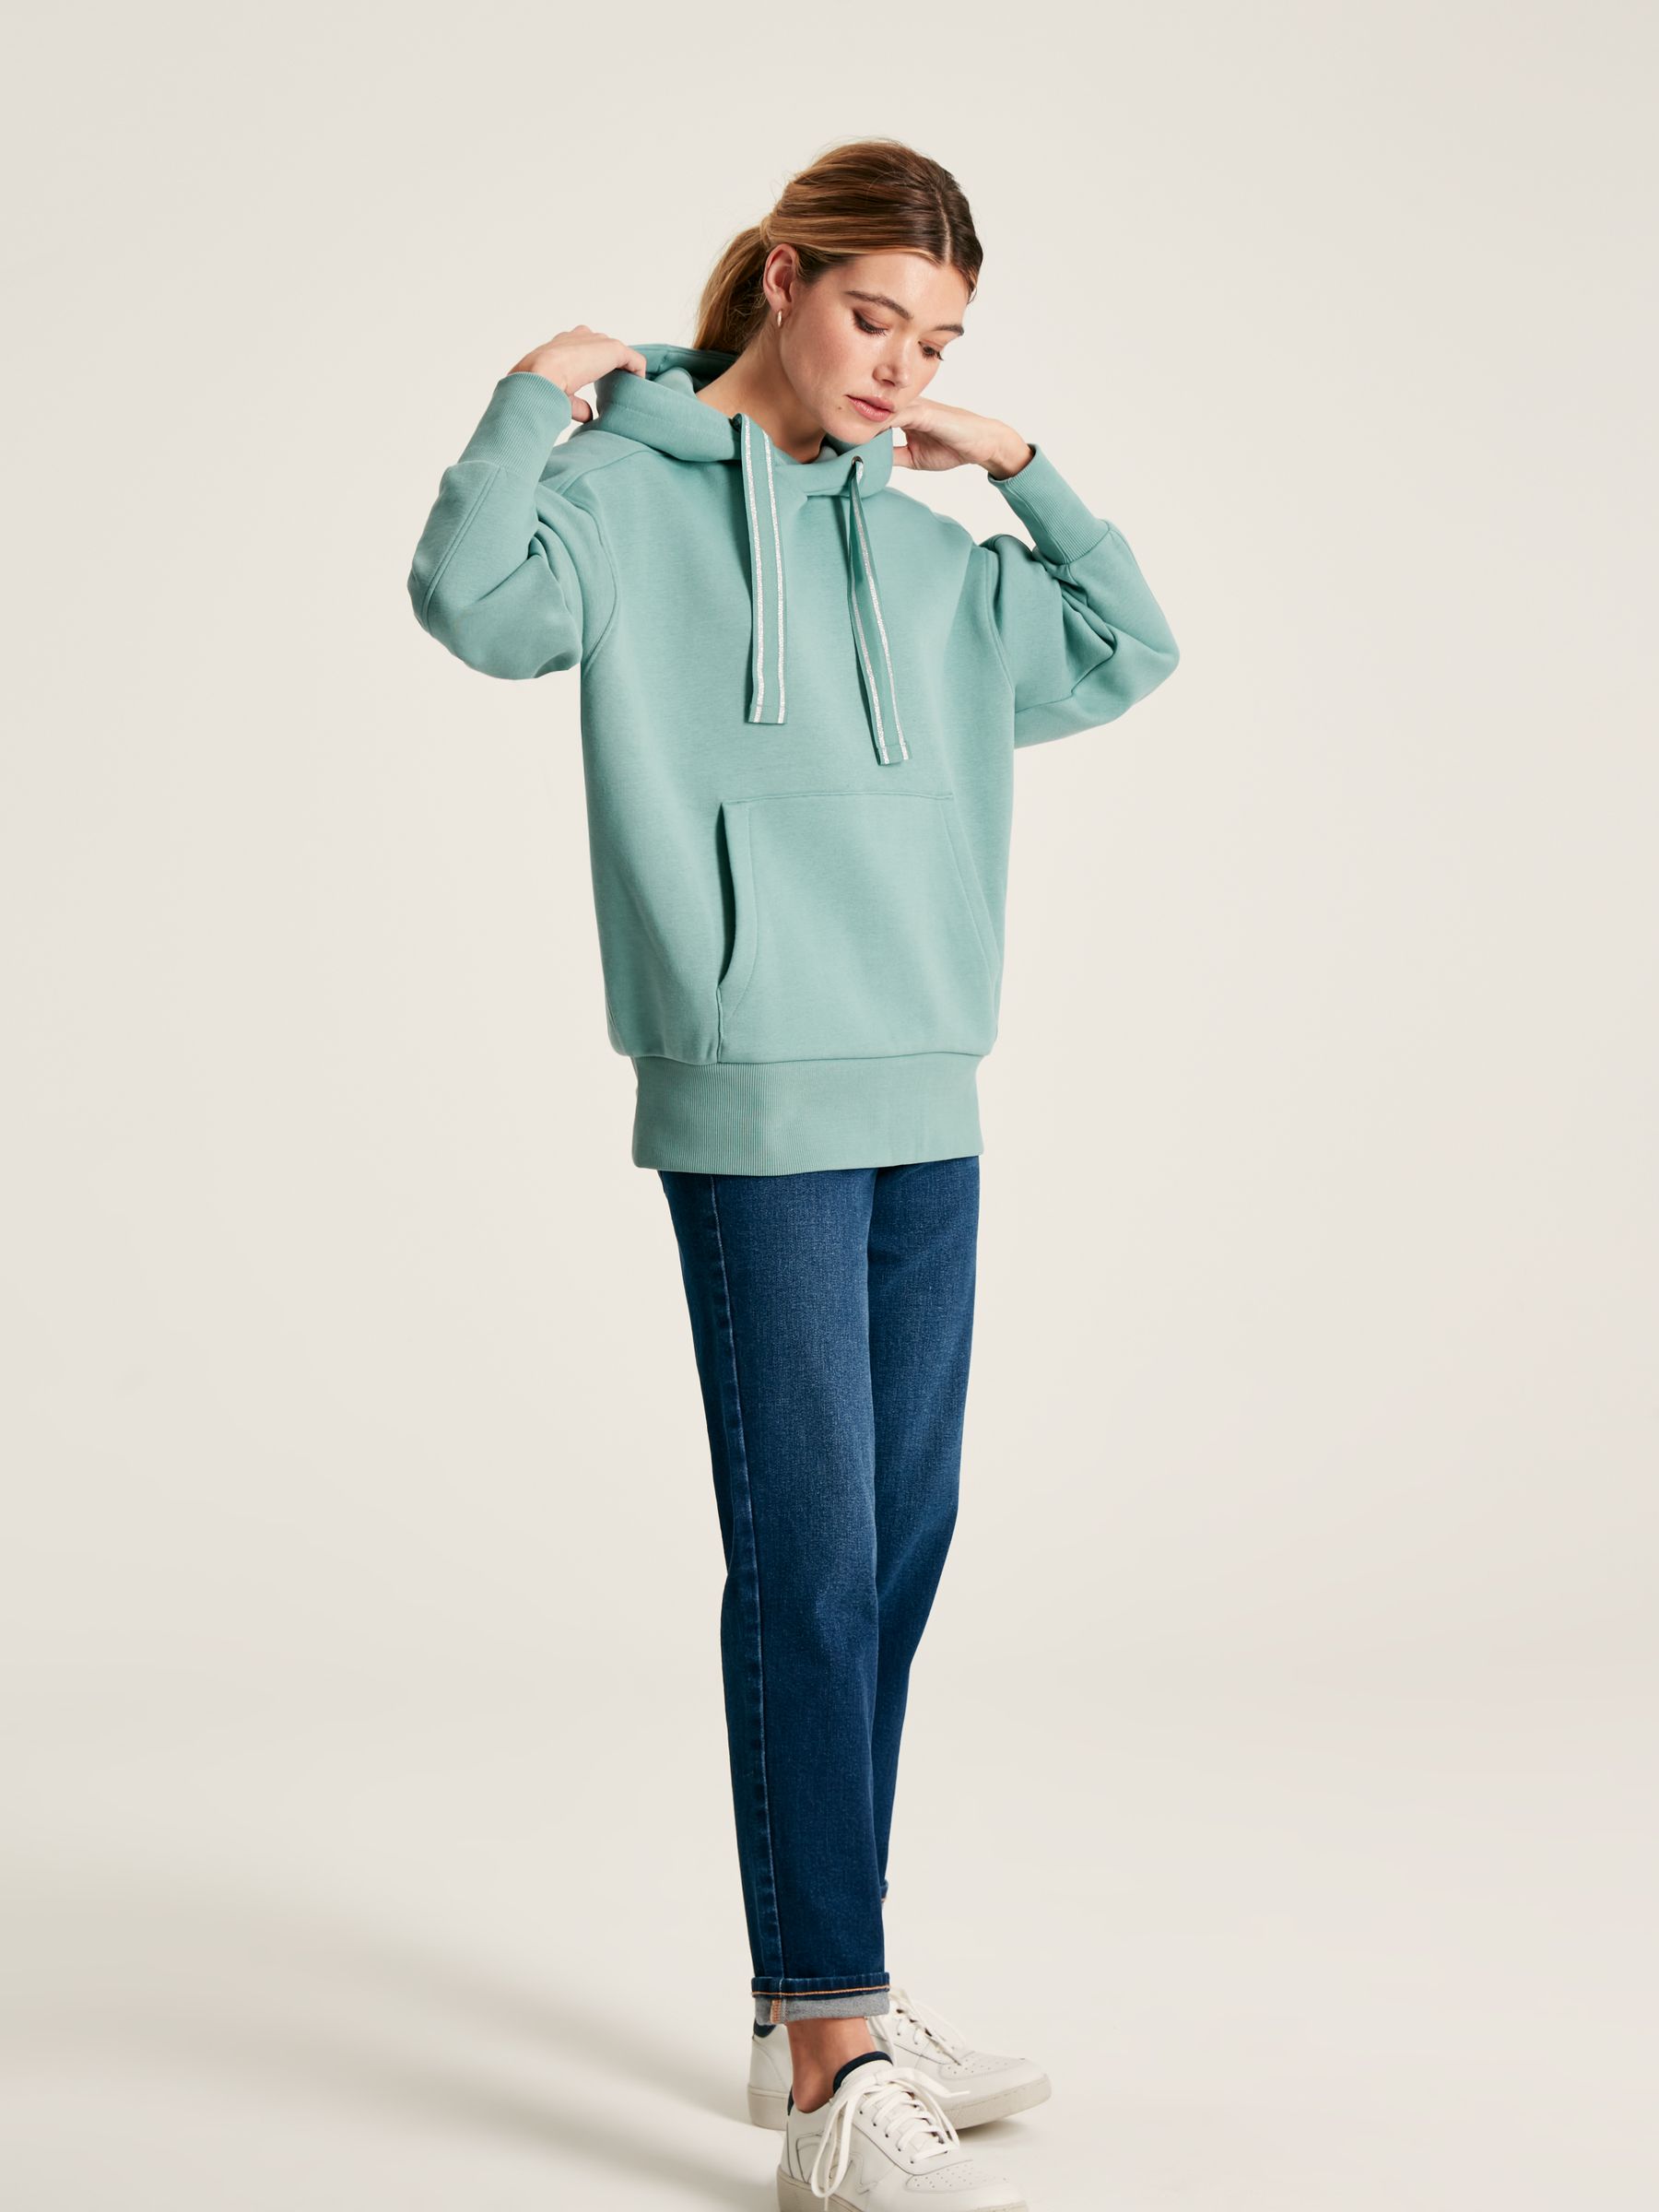 Buy Joules Cara Oversized Hoodie from the Joules online shop